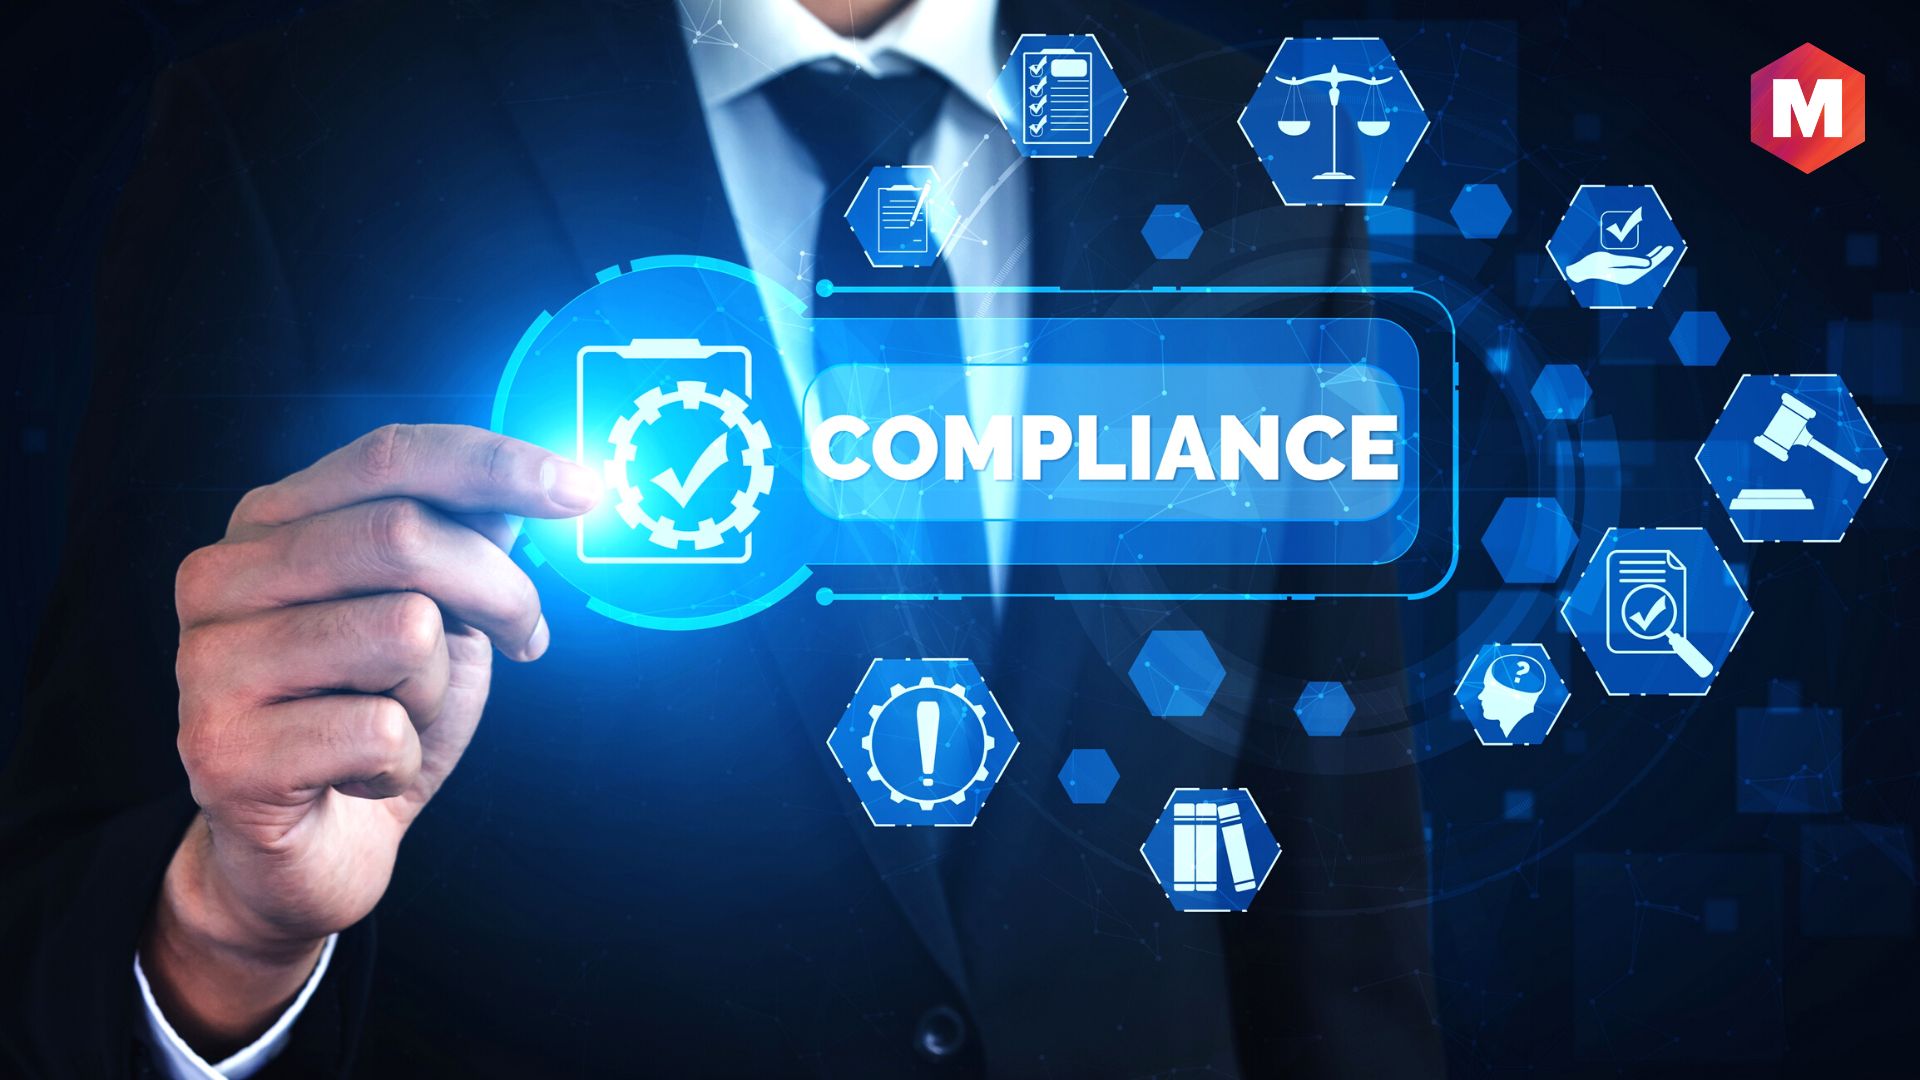 What Is Compliance? Definition, Benefits And Techniques